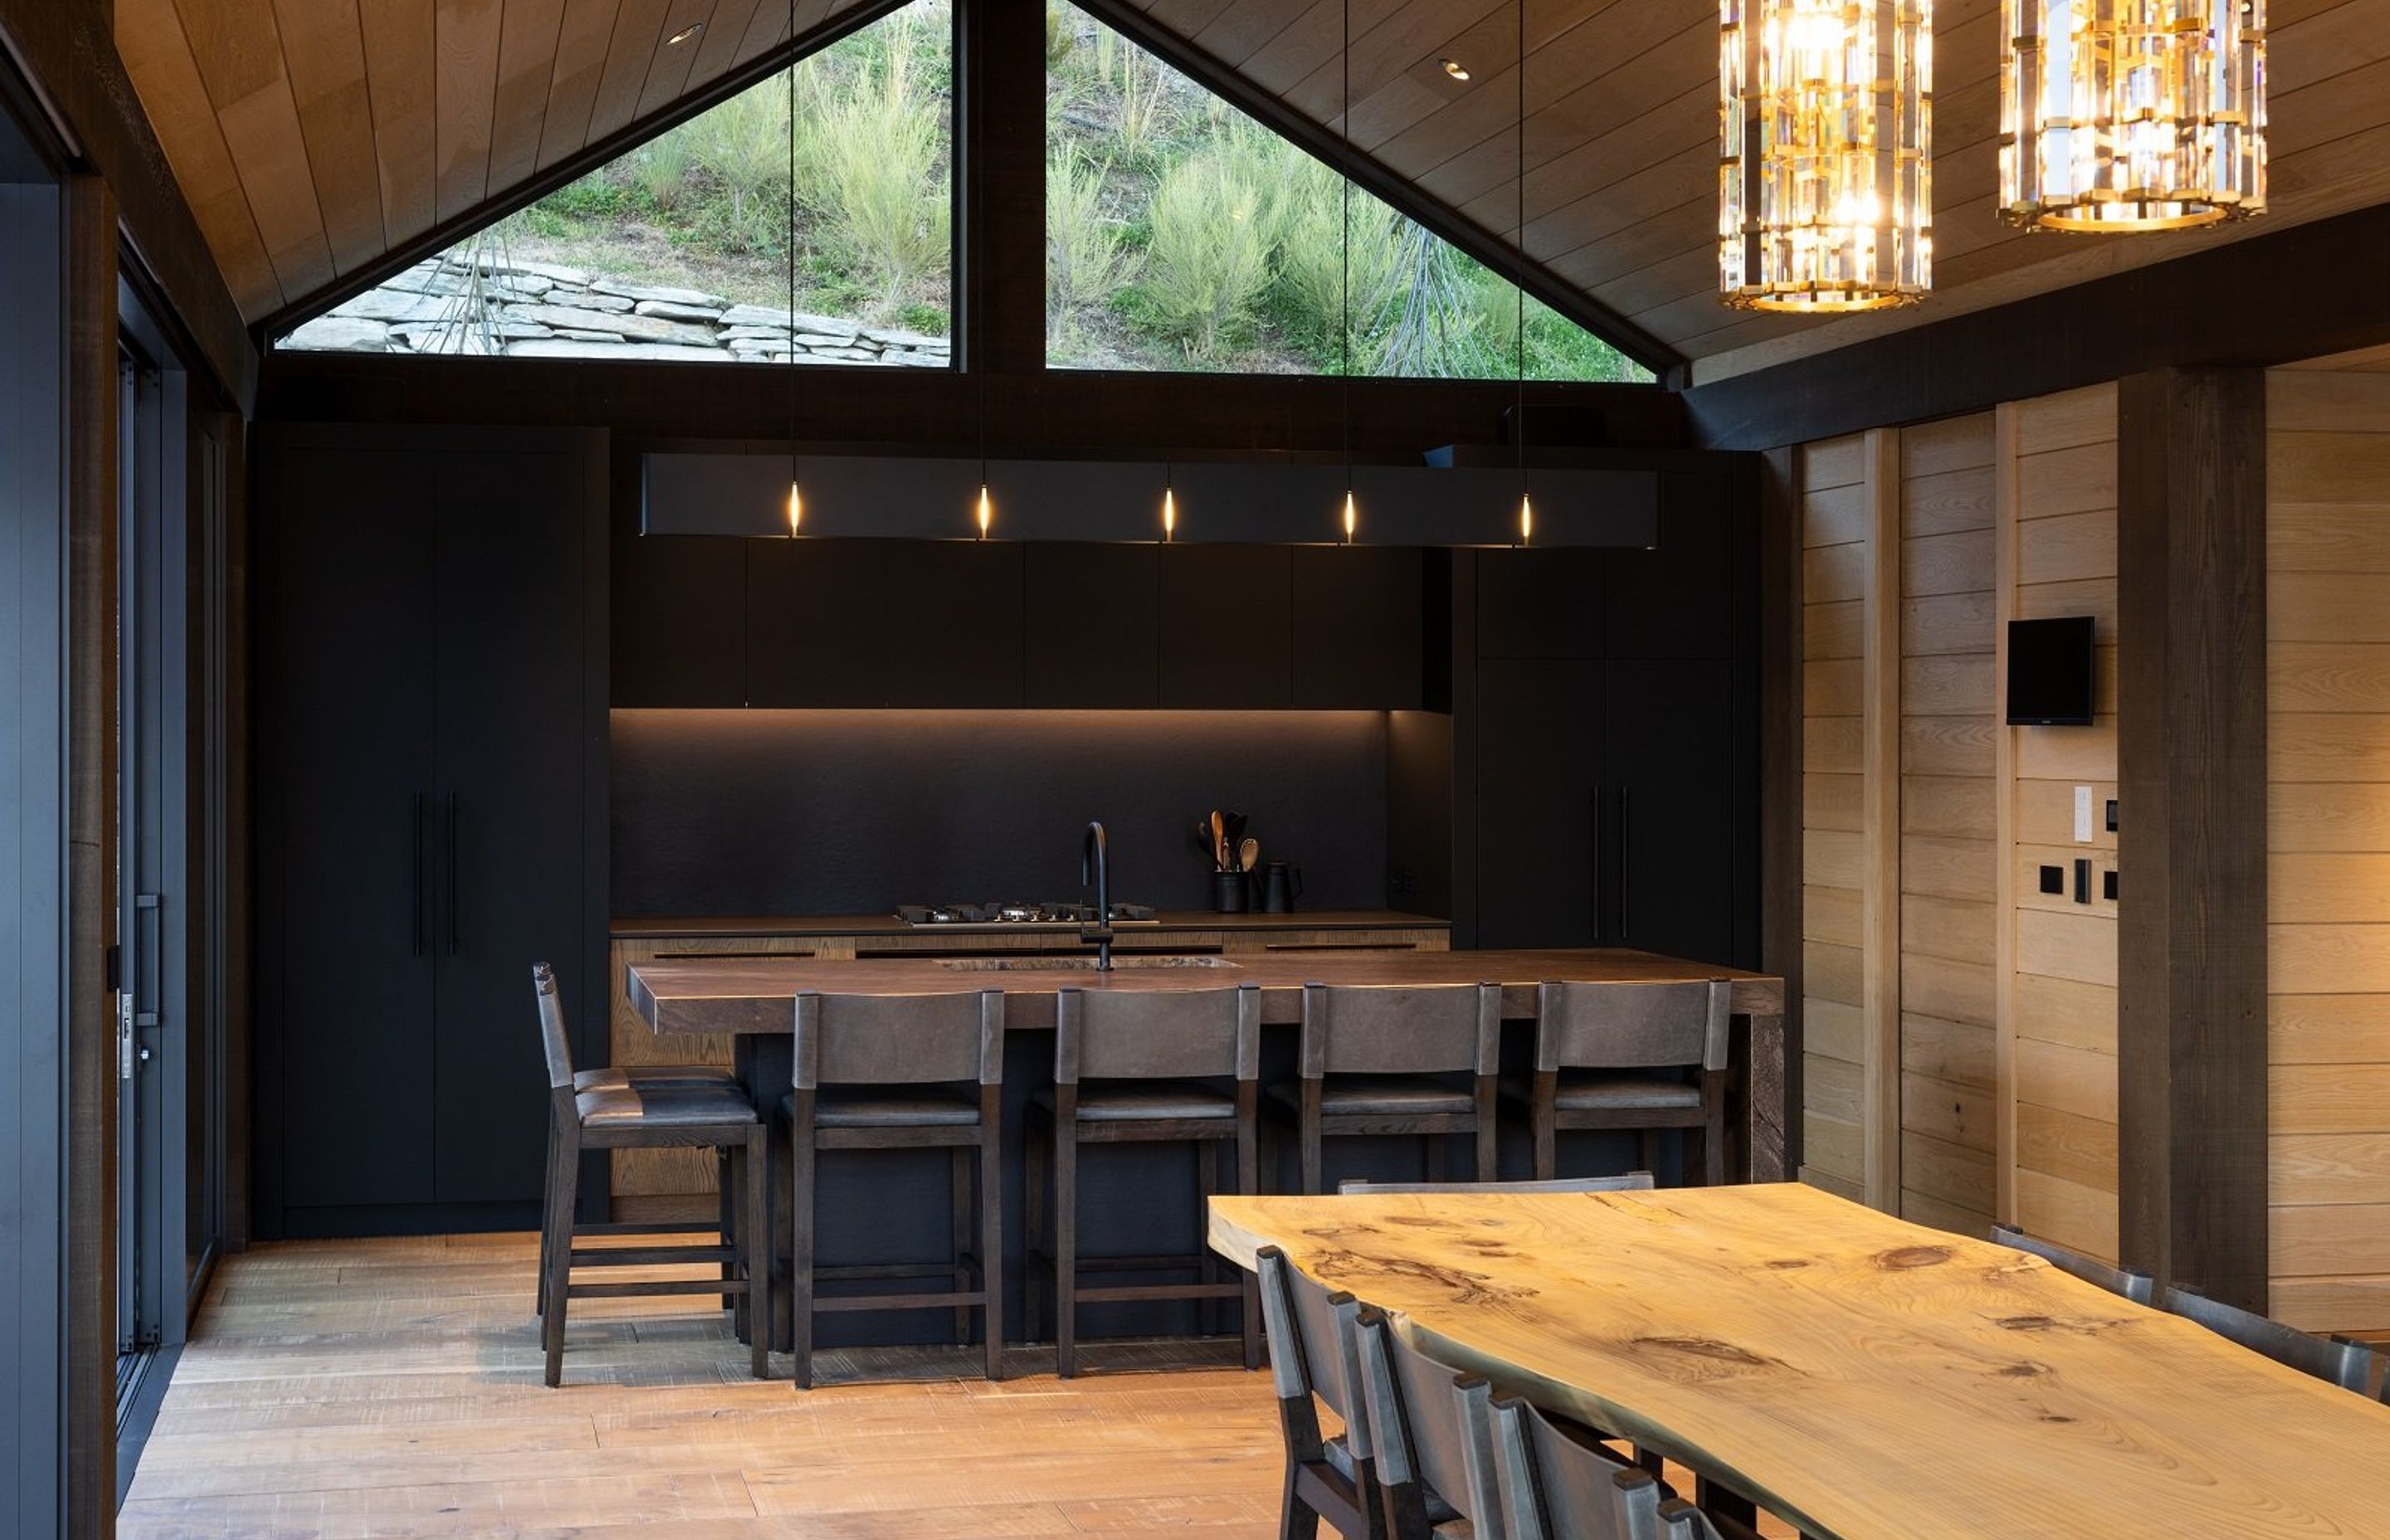 Adjacent to the main living space, the kitchen, with its dark and moody colour palette, is recessed back towards the hill.